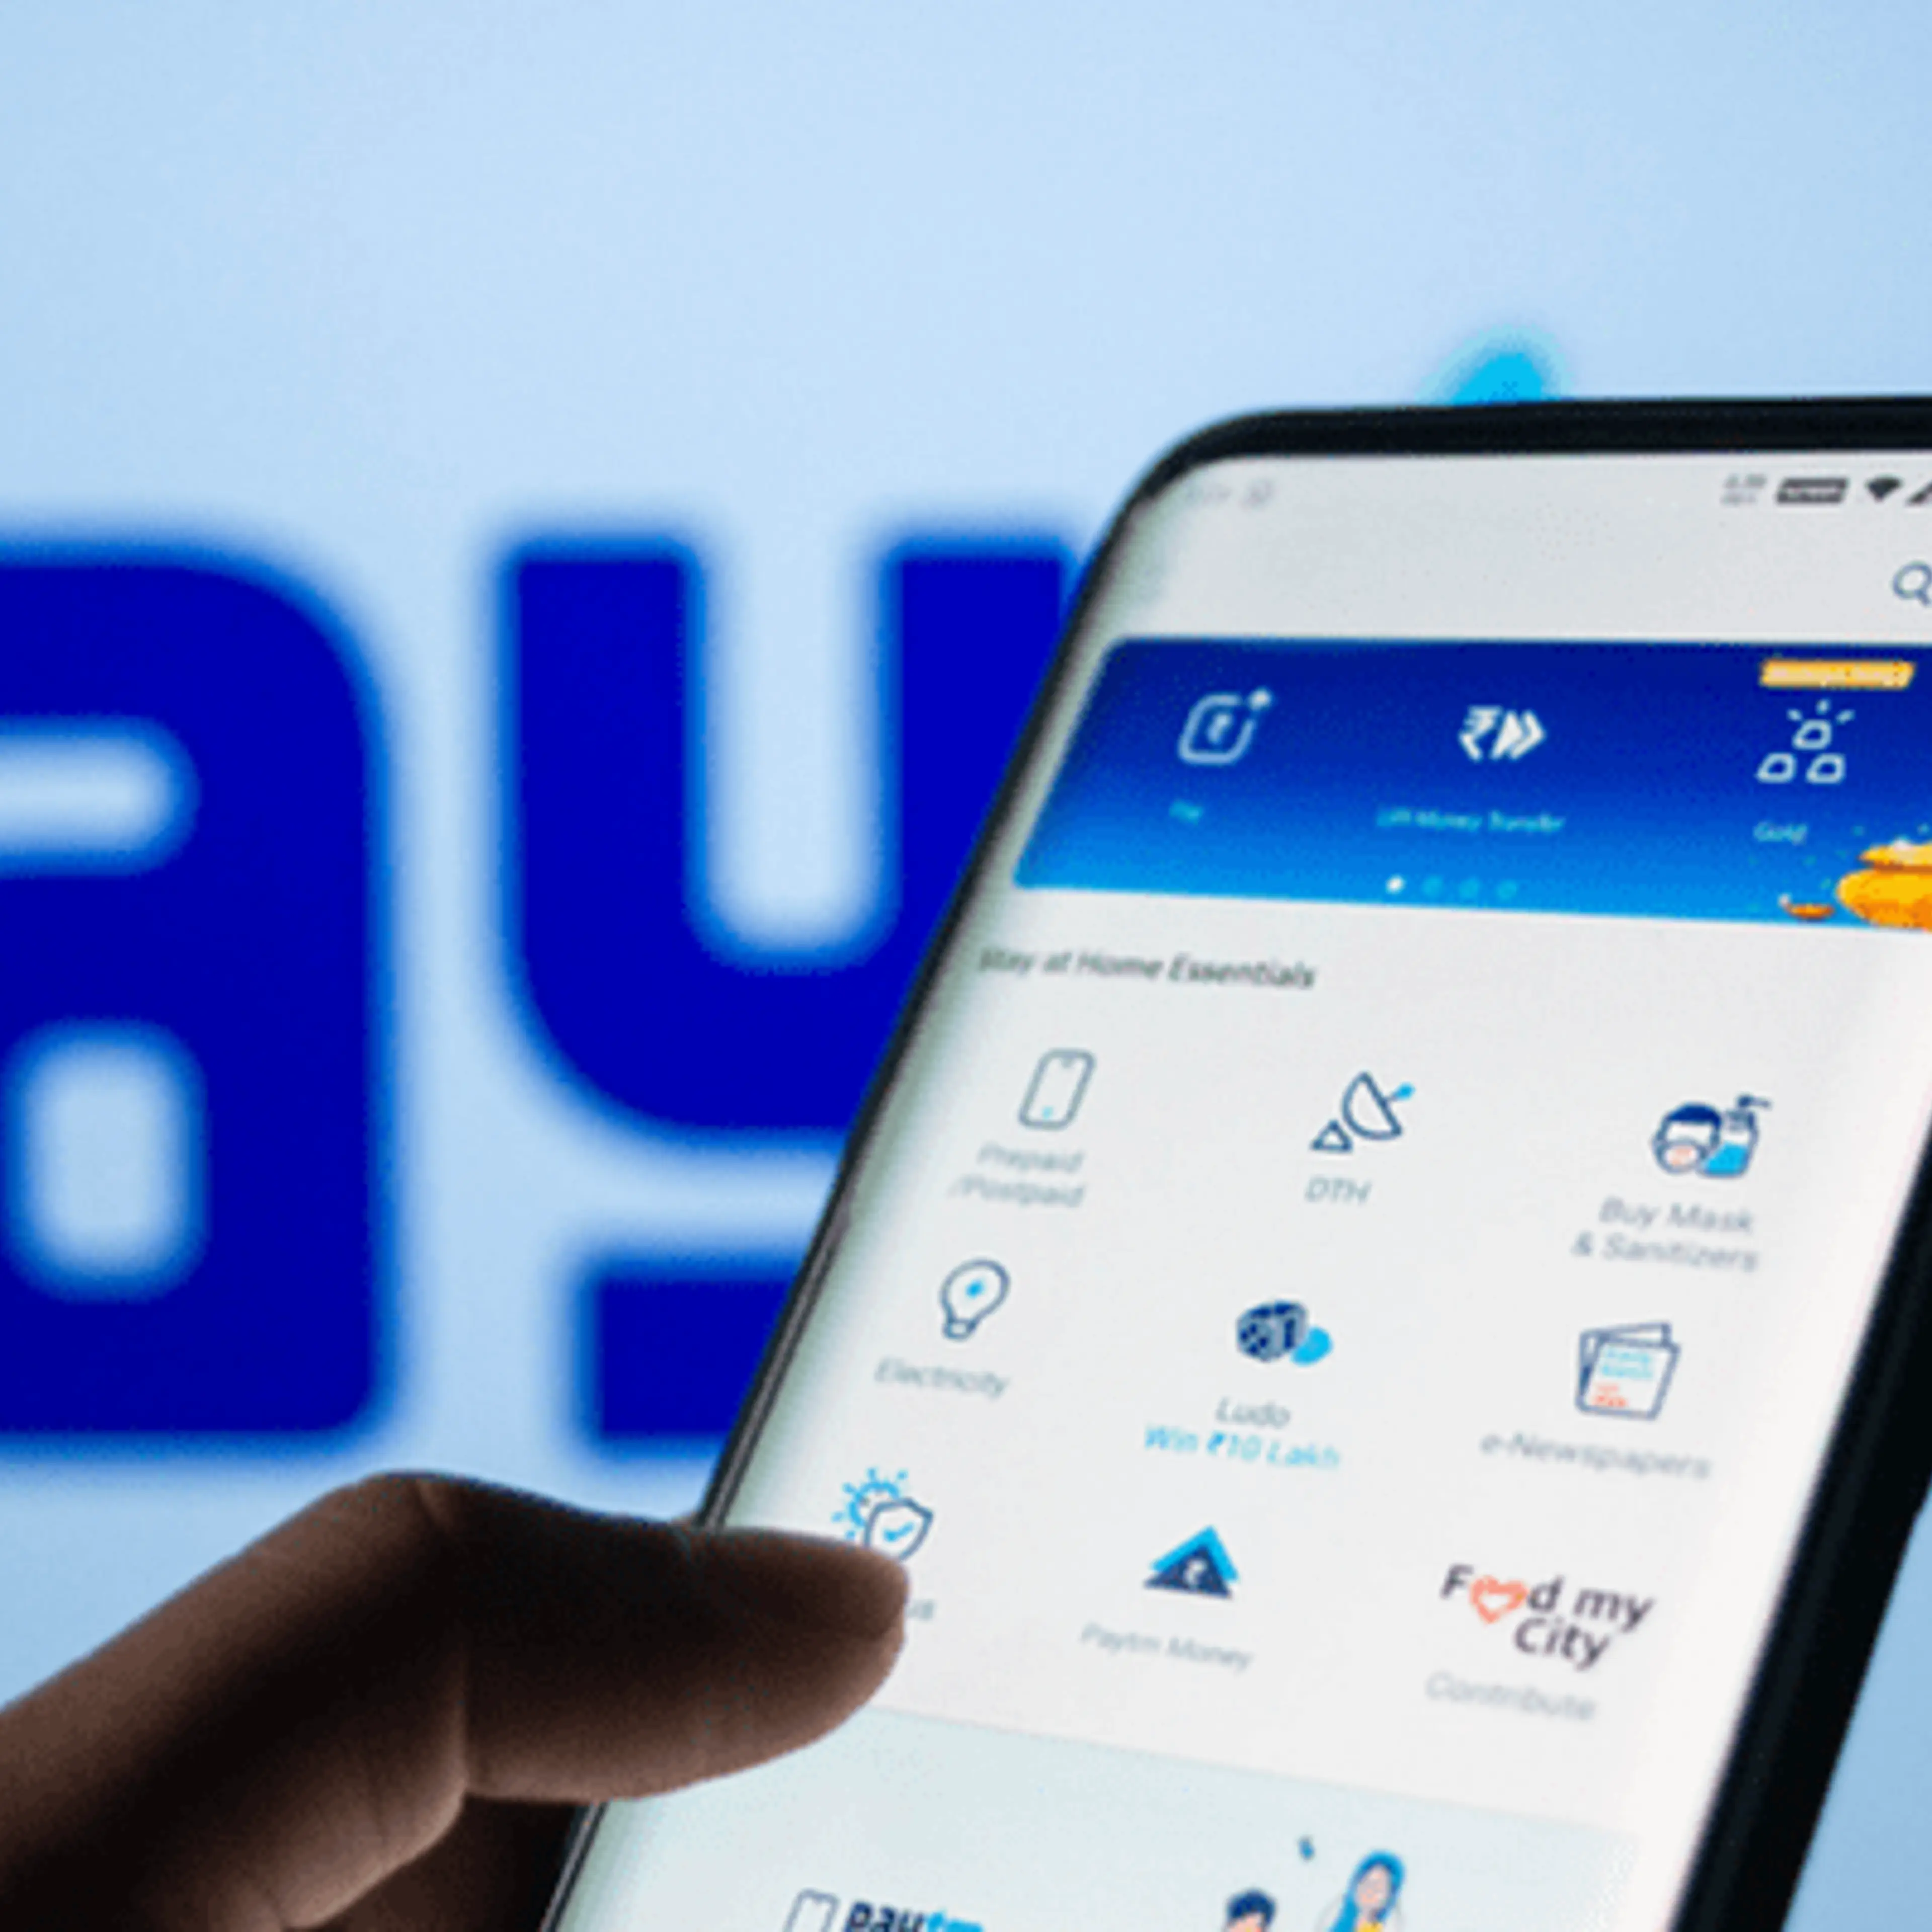 Paytm Payments Bank's auditor questions viability: Report